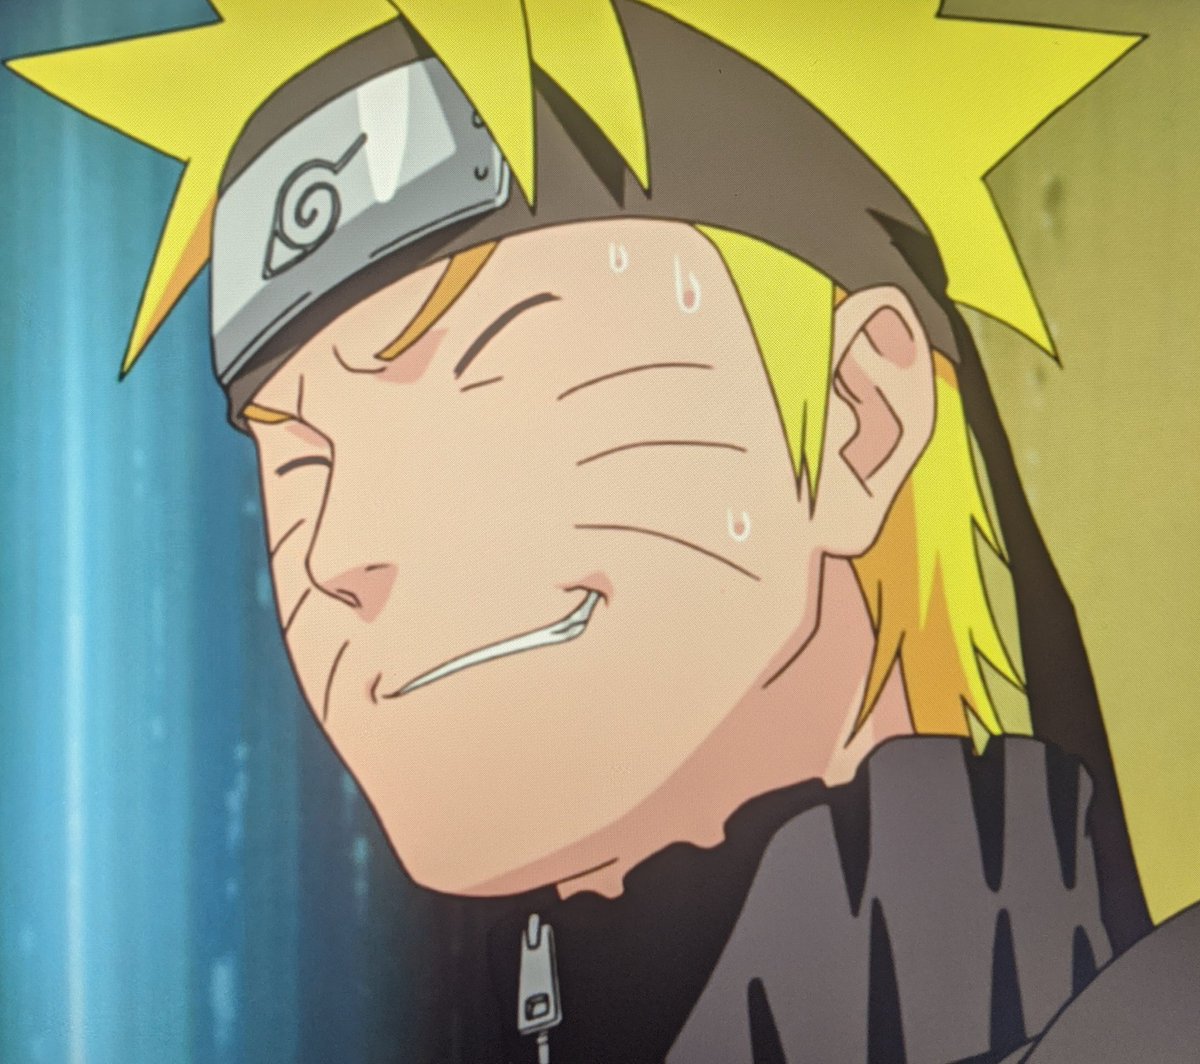 HELP NARUTO IS TRYING TO IMPRESS BEE BY RAPPING AND ITS SO FUNNY IM PEEINH